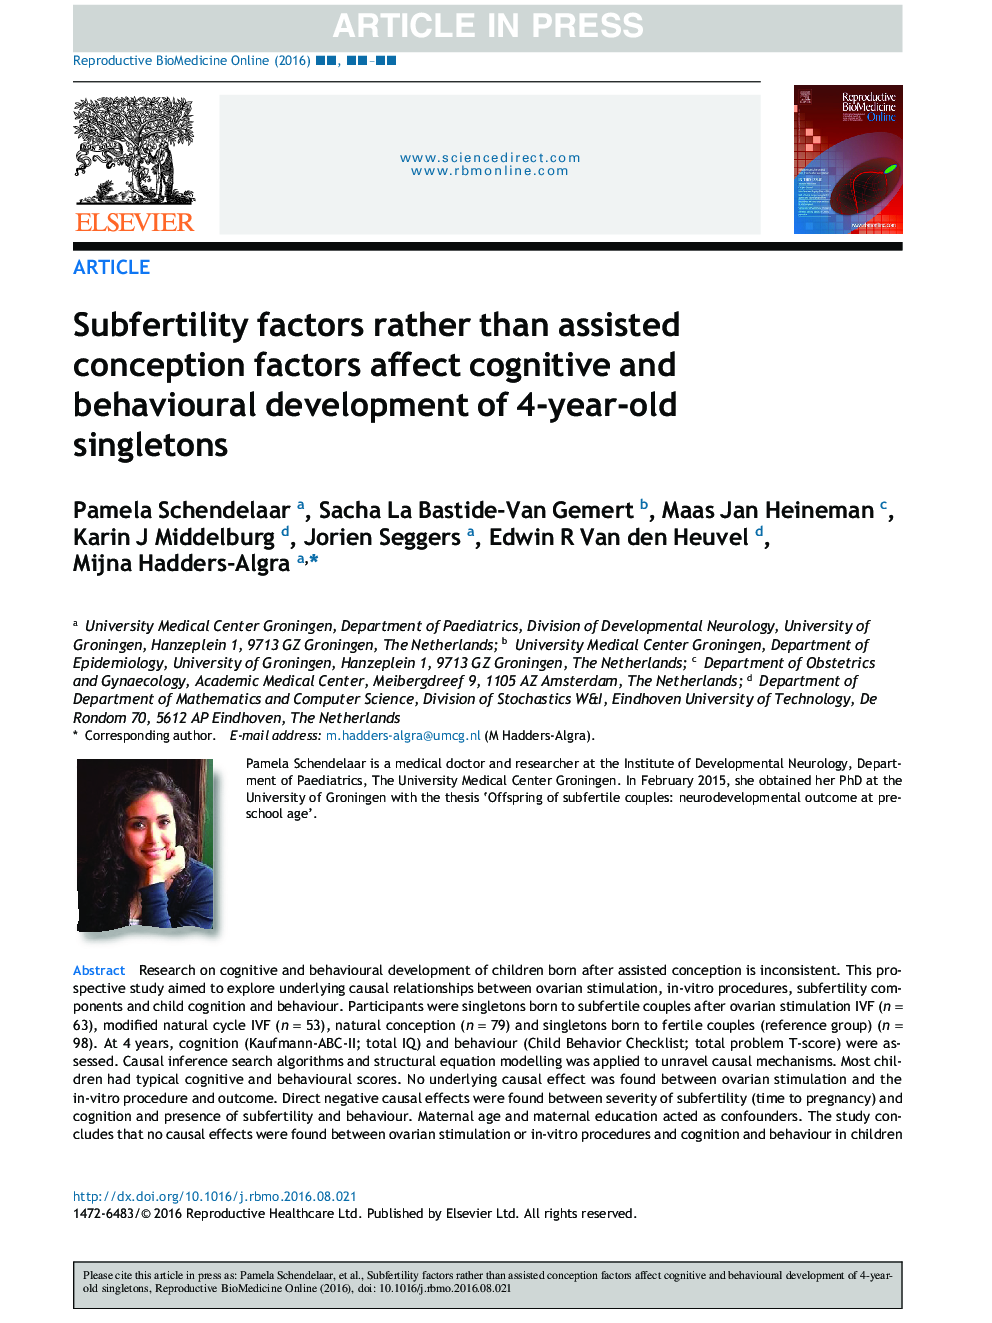 Subfertility factors rather than assisted conception factors affect cognitive and behavioural development of 4-year-old singletons